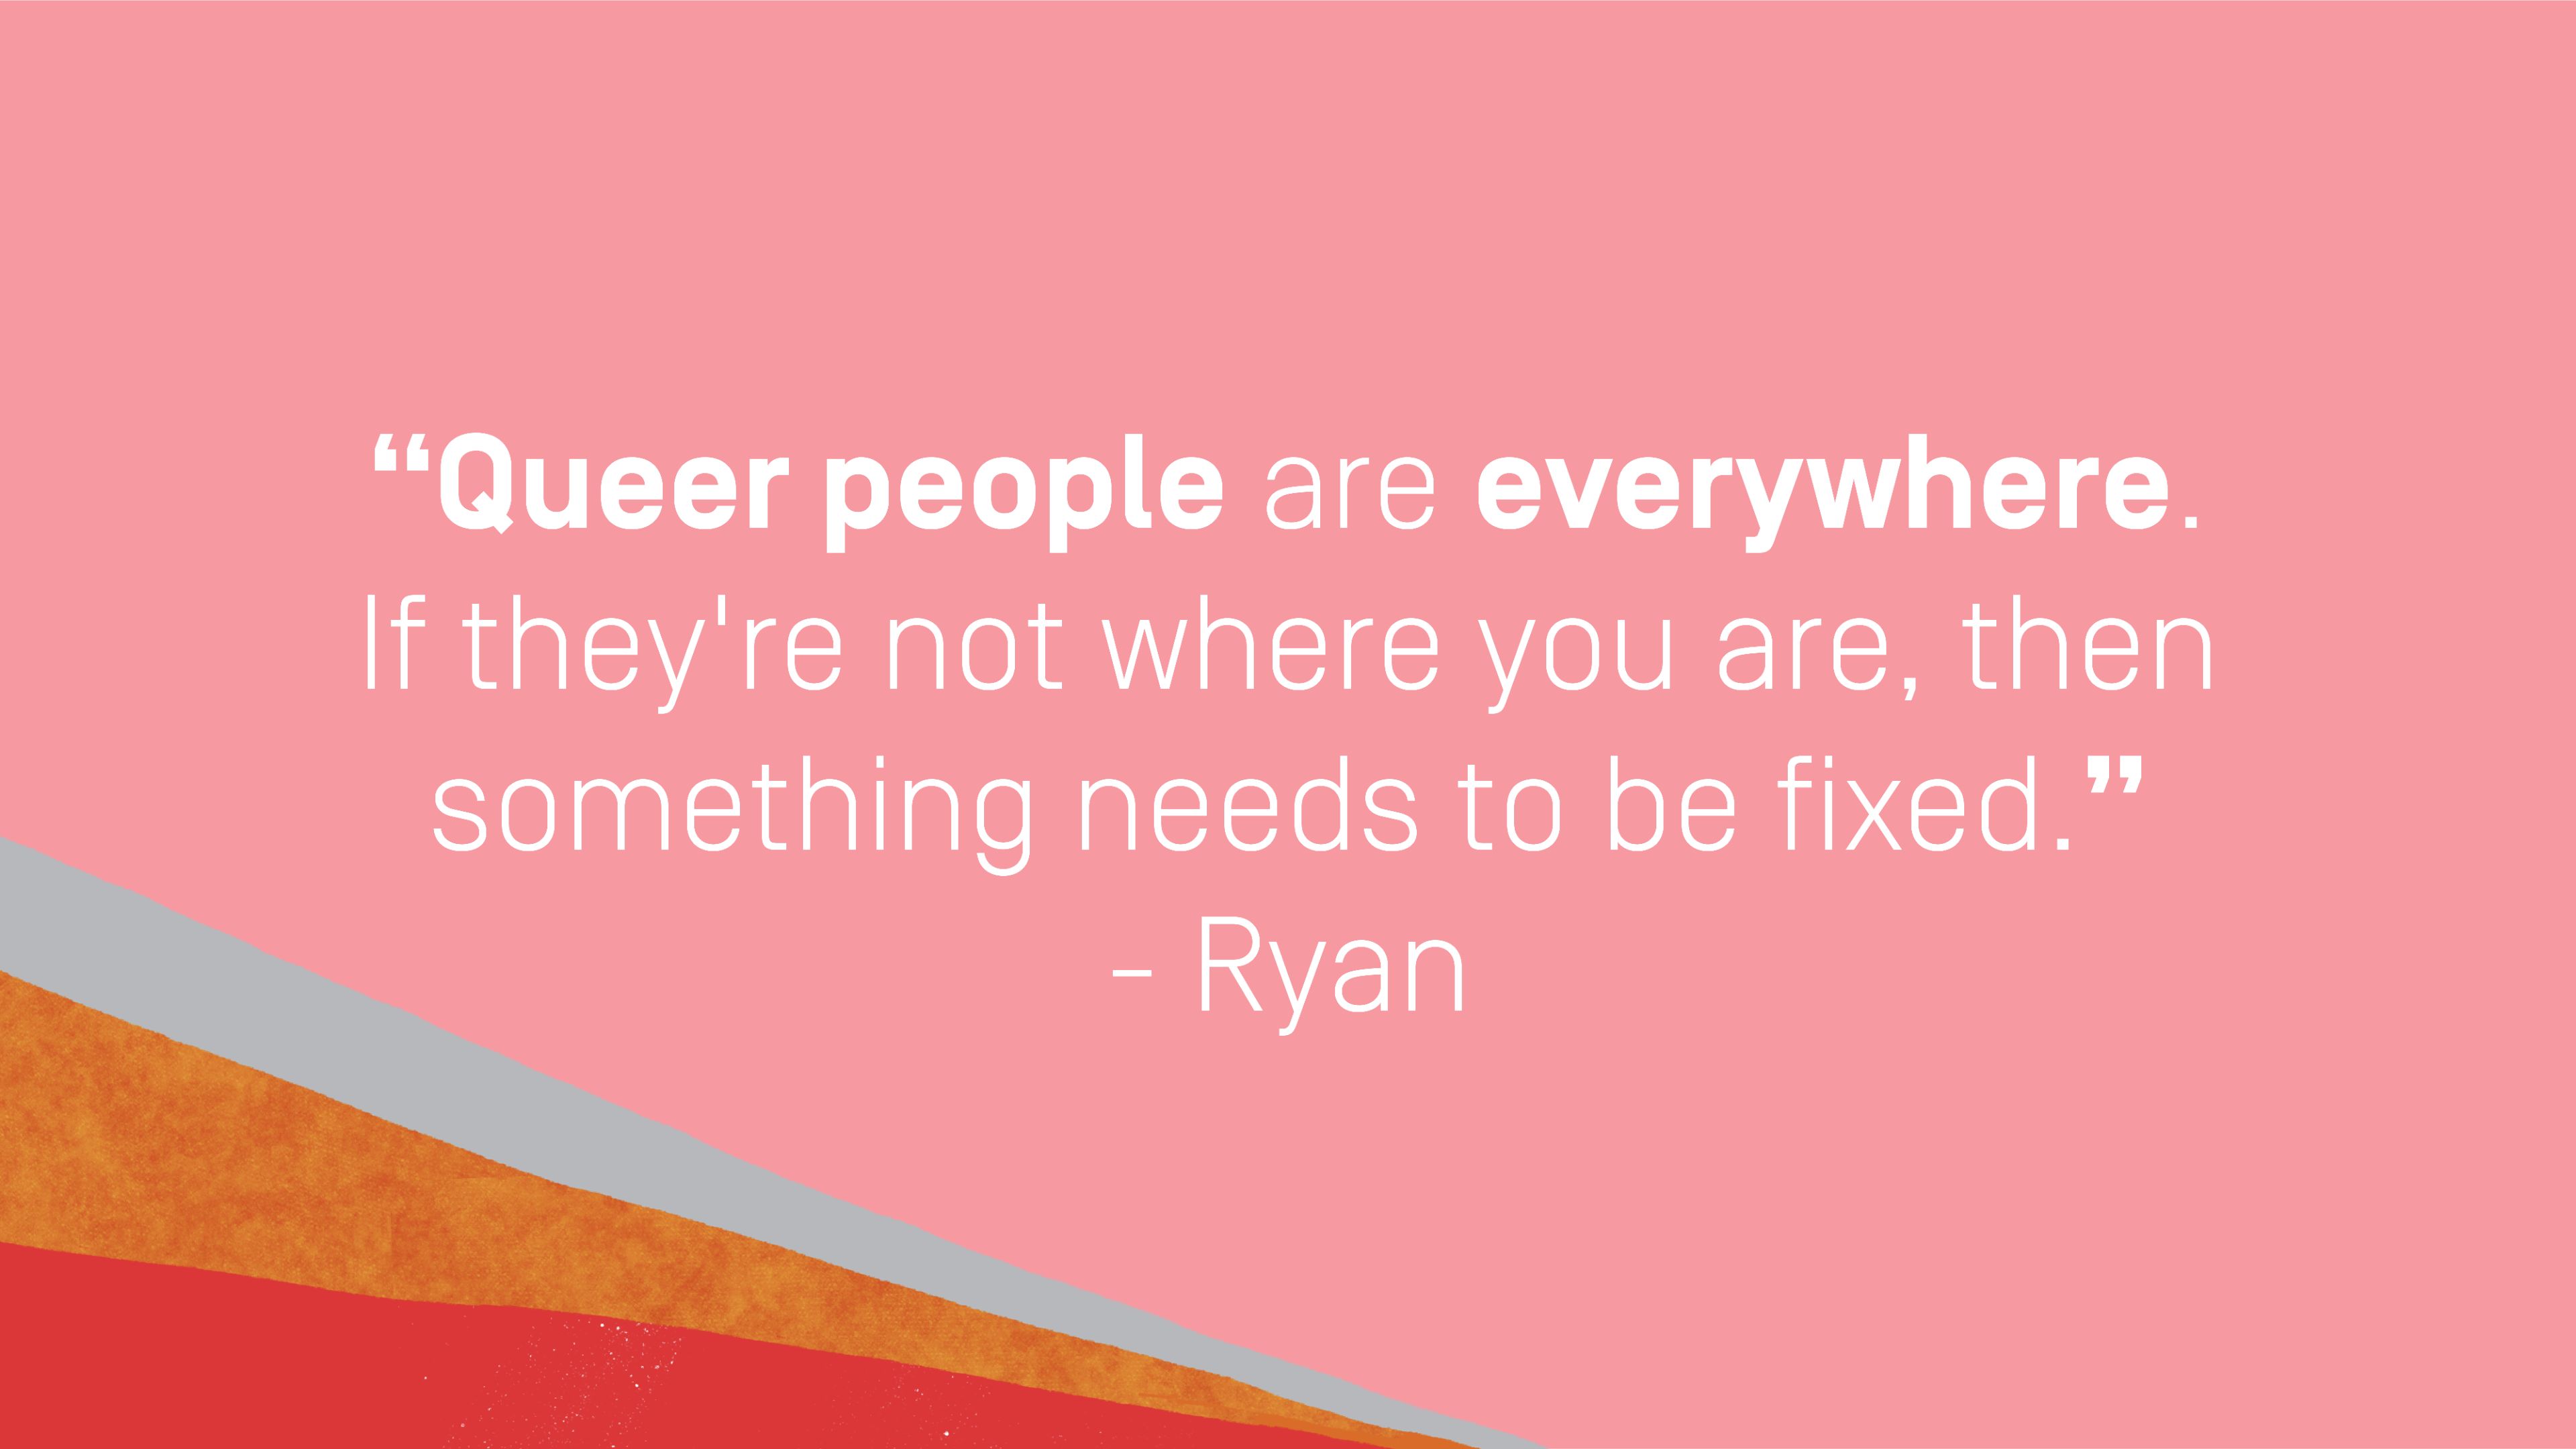 Quote by Ryan: "Queer people are everywhere. If they're not where you are, then something needs to be fixed."